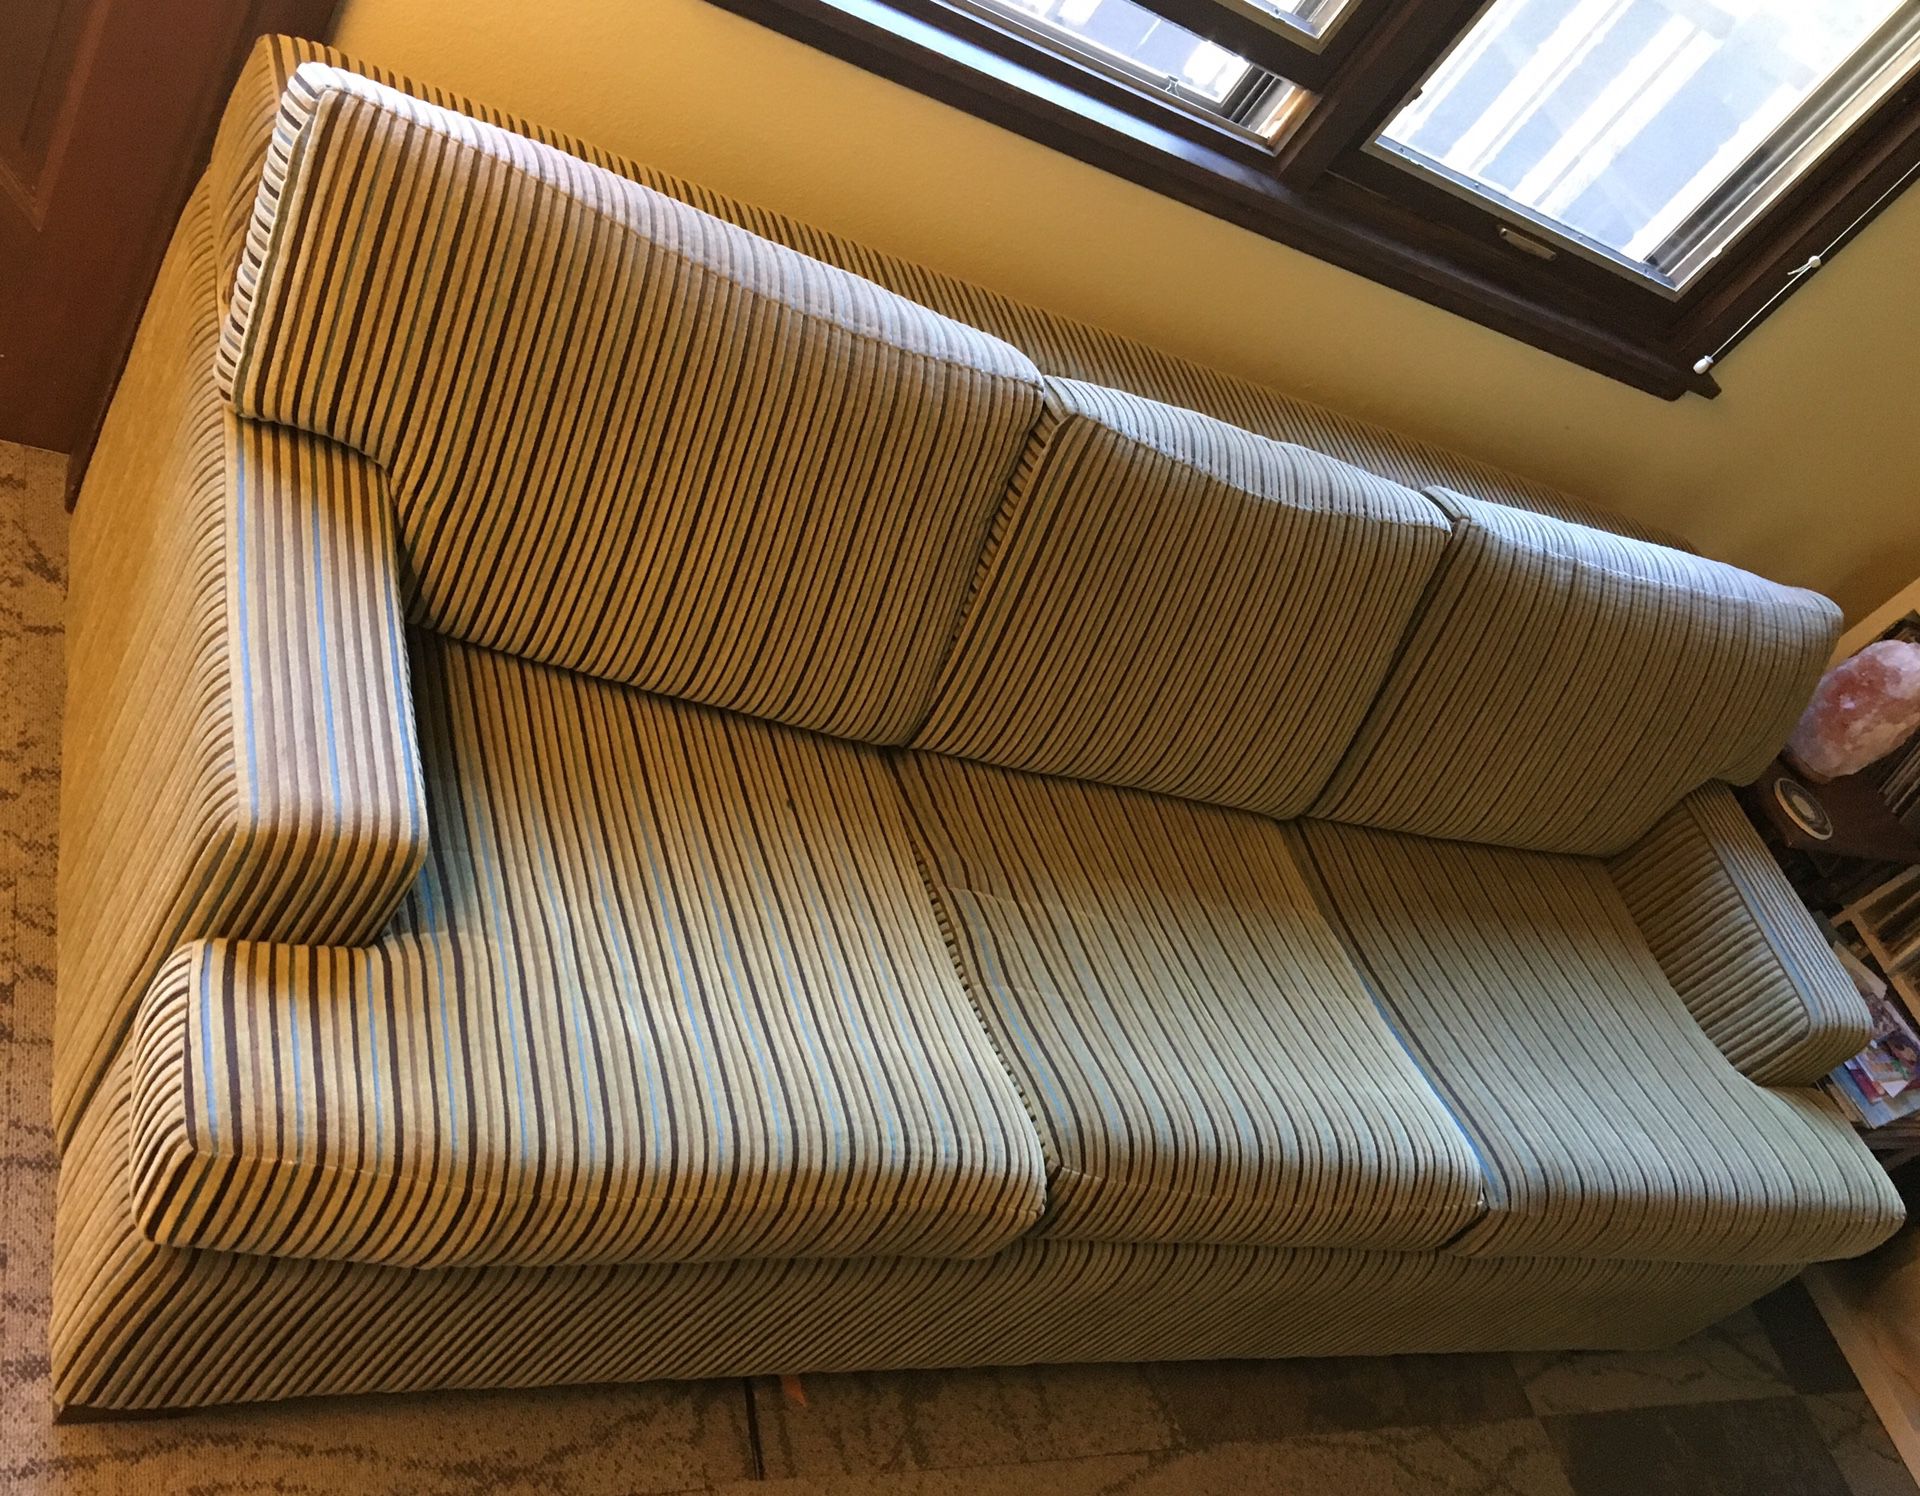 FREE pullout couch